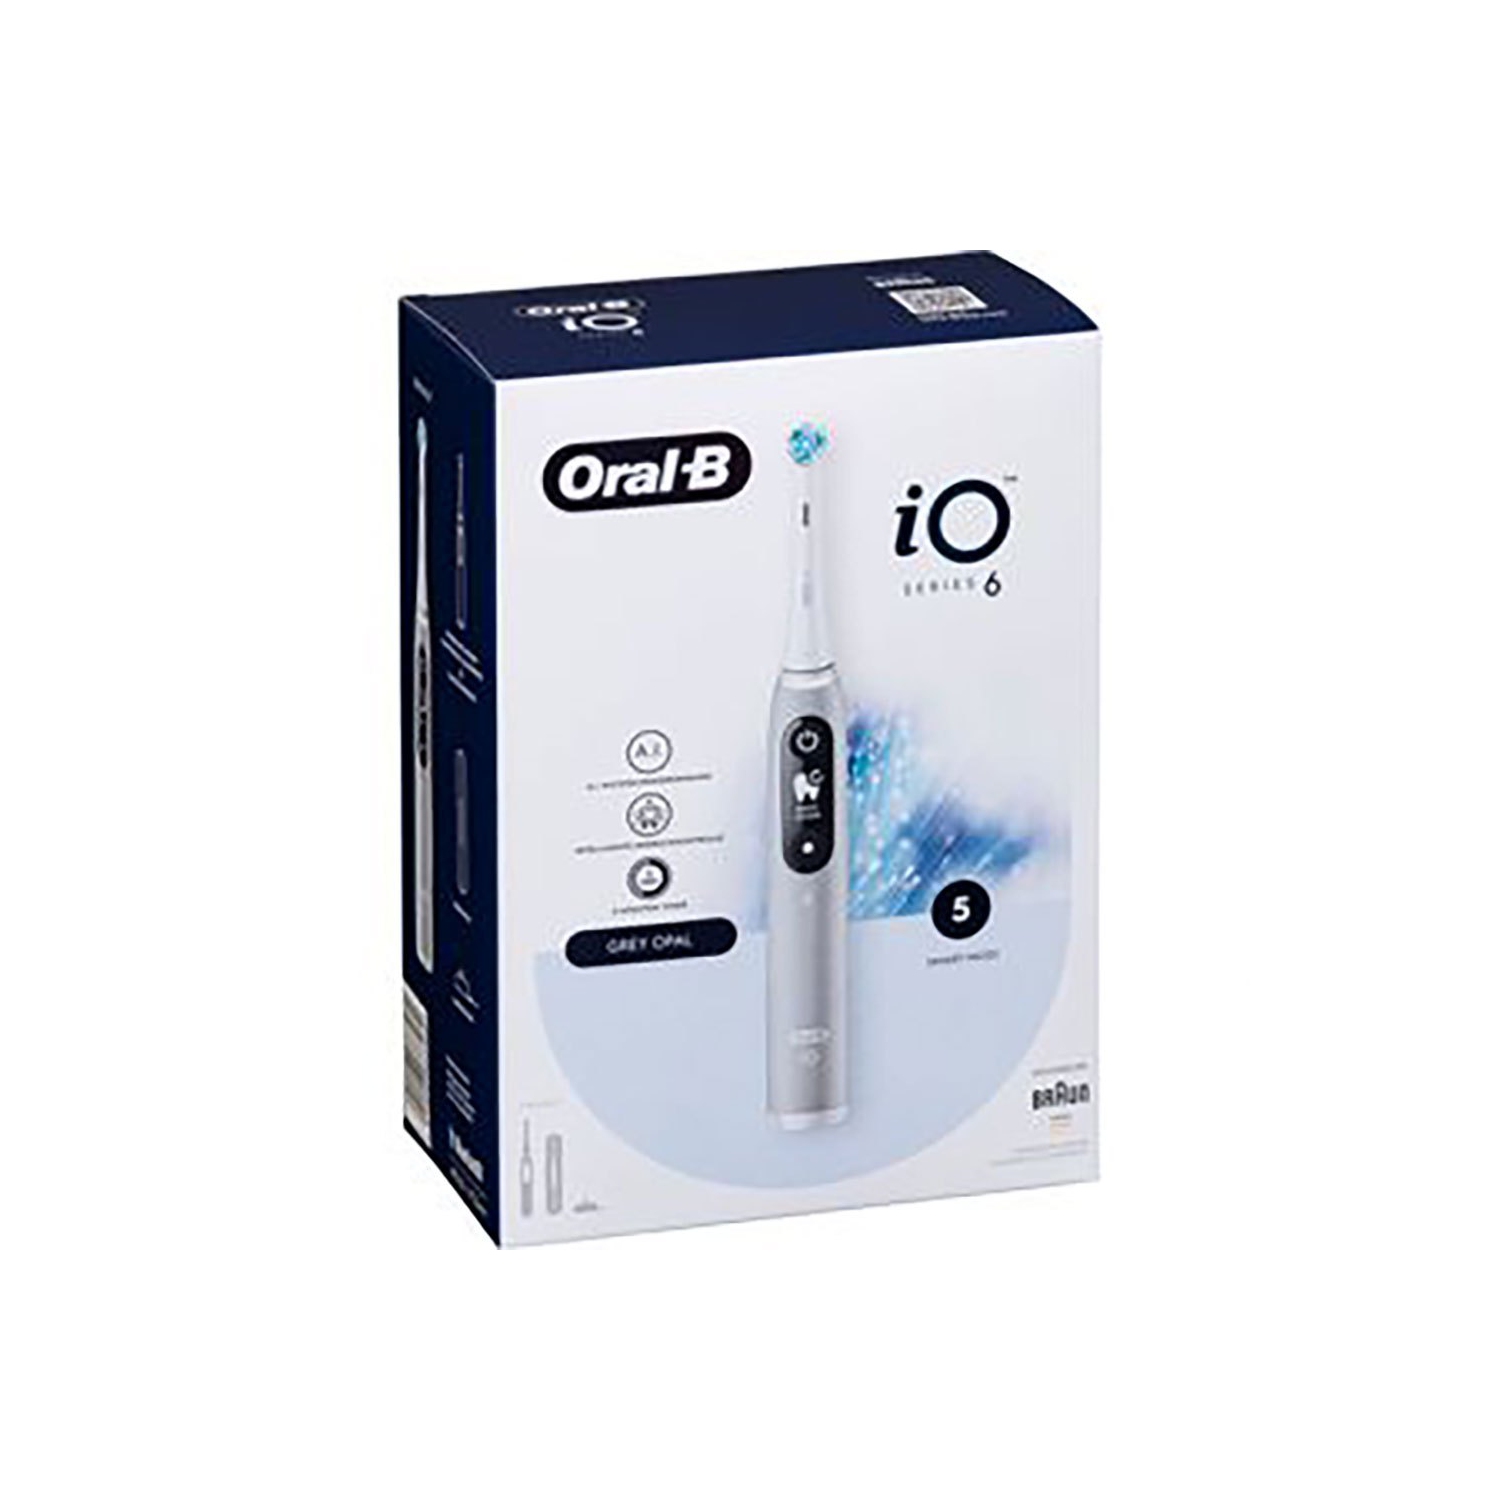 Oral-B- iO Series 6 - Smart Electric Toothbrush - 5 Smart Modes - Rechargeable Toothbrush - Grey Opal